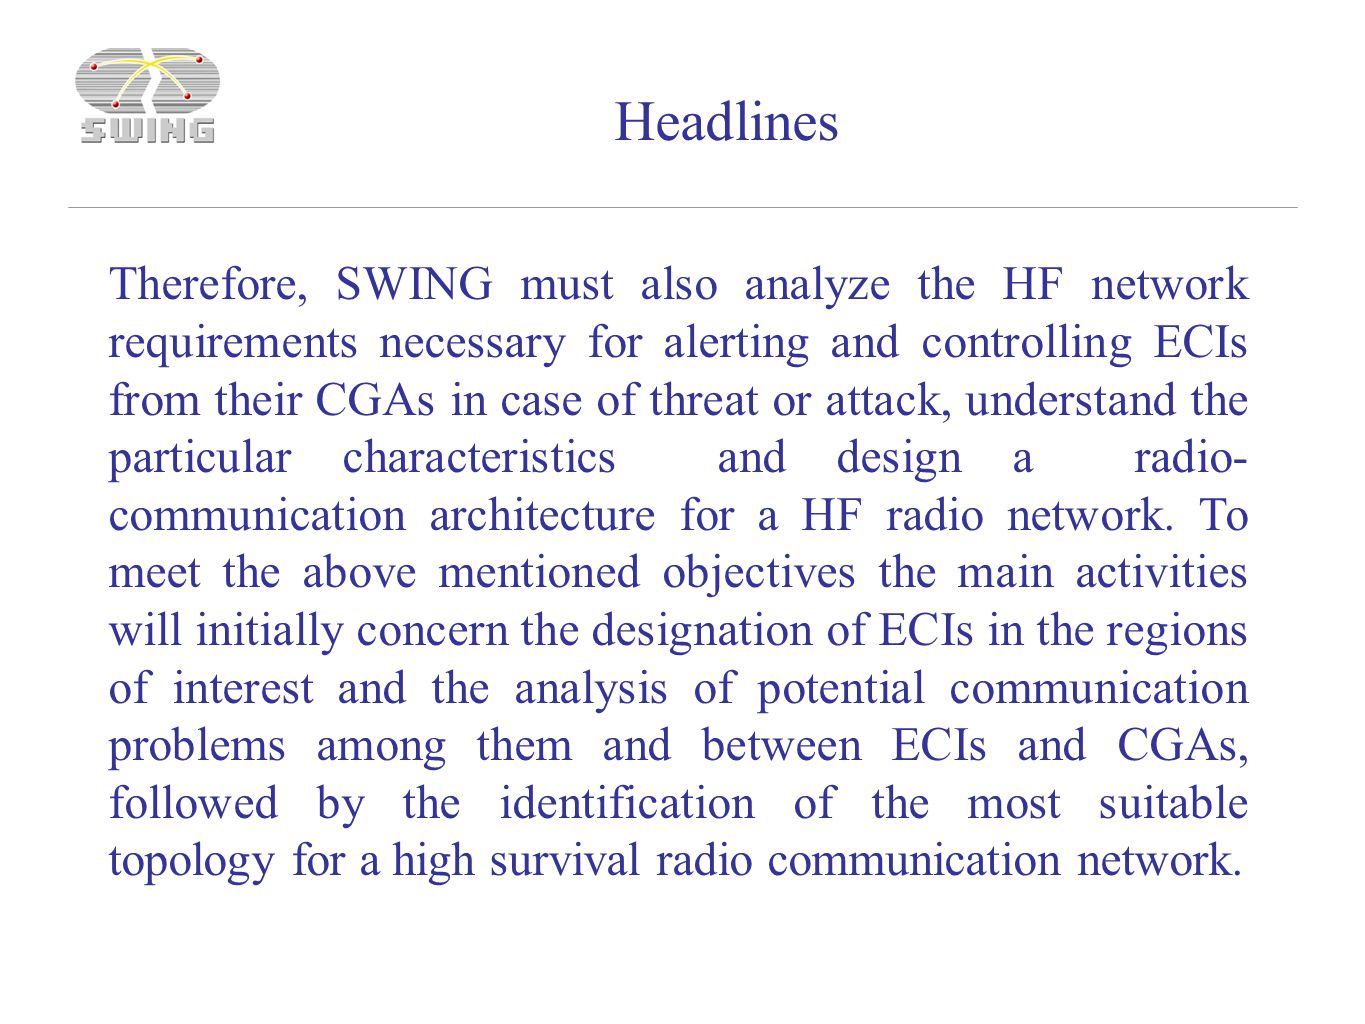 Therefore, SWING must also analyze the HF network requirements necessary for alerting and controlling ECIs from their CGAs in case of threat or attack, understand the particular characteristics and design a radio- communication architecture for a HF radio network.